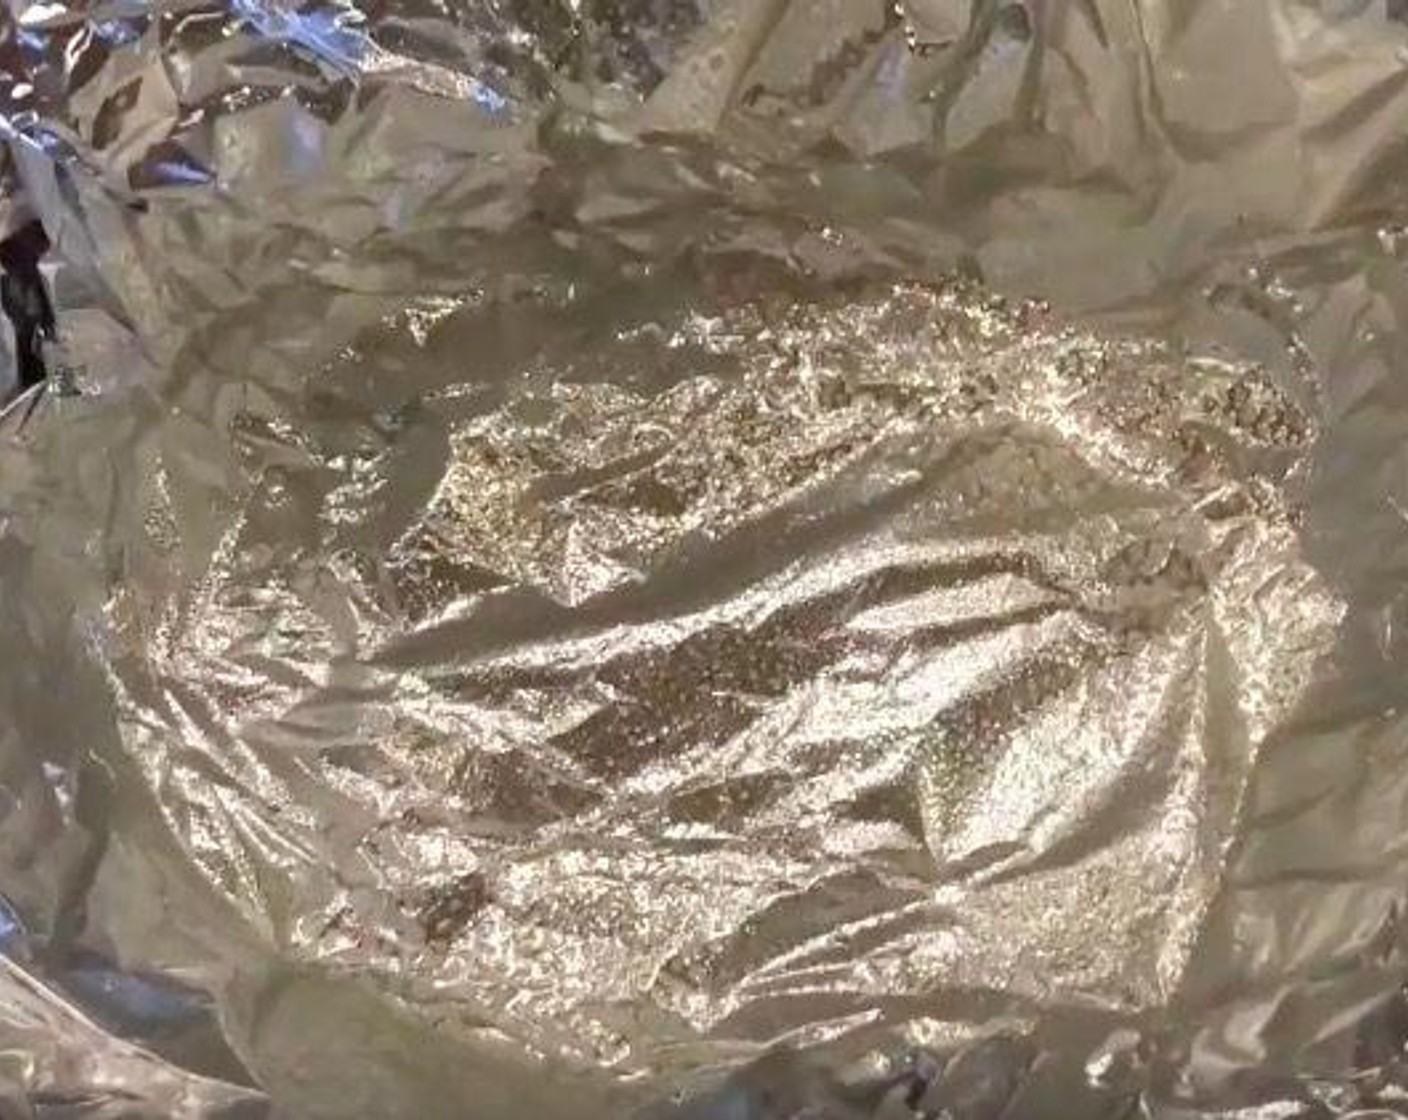 step 1 Line your crock pot with aluminum foil leaving enough to cover the potatoes completely. Spray aluminum foil with Nonstick Cooking Spray (as needed).